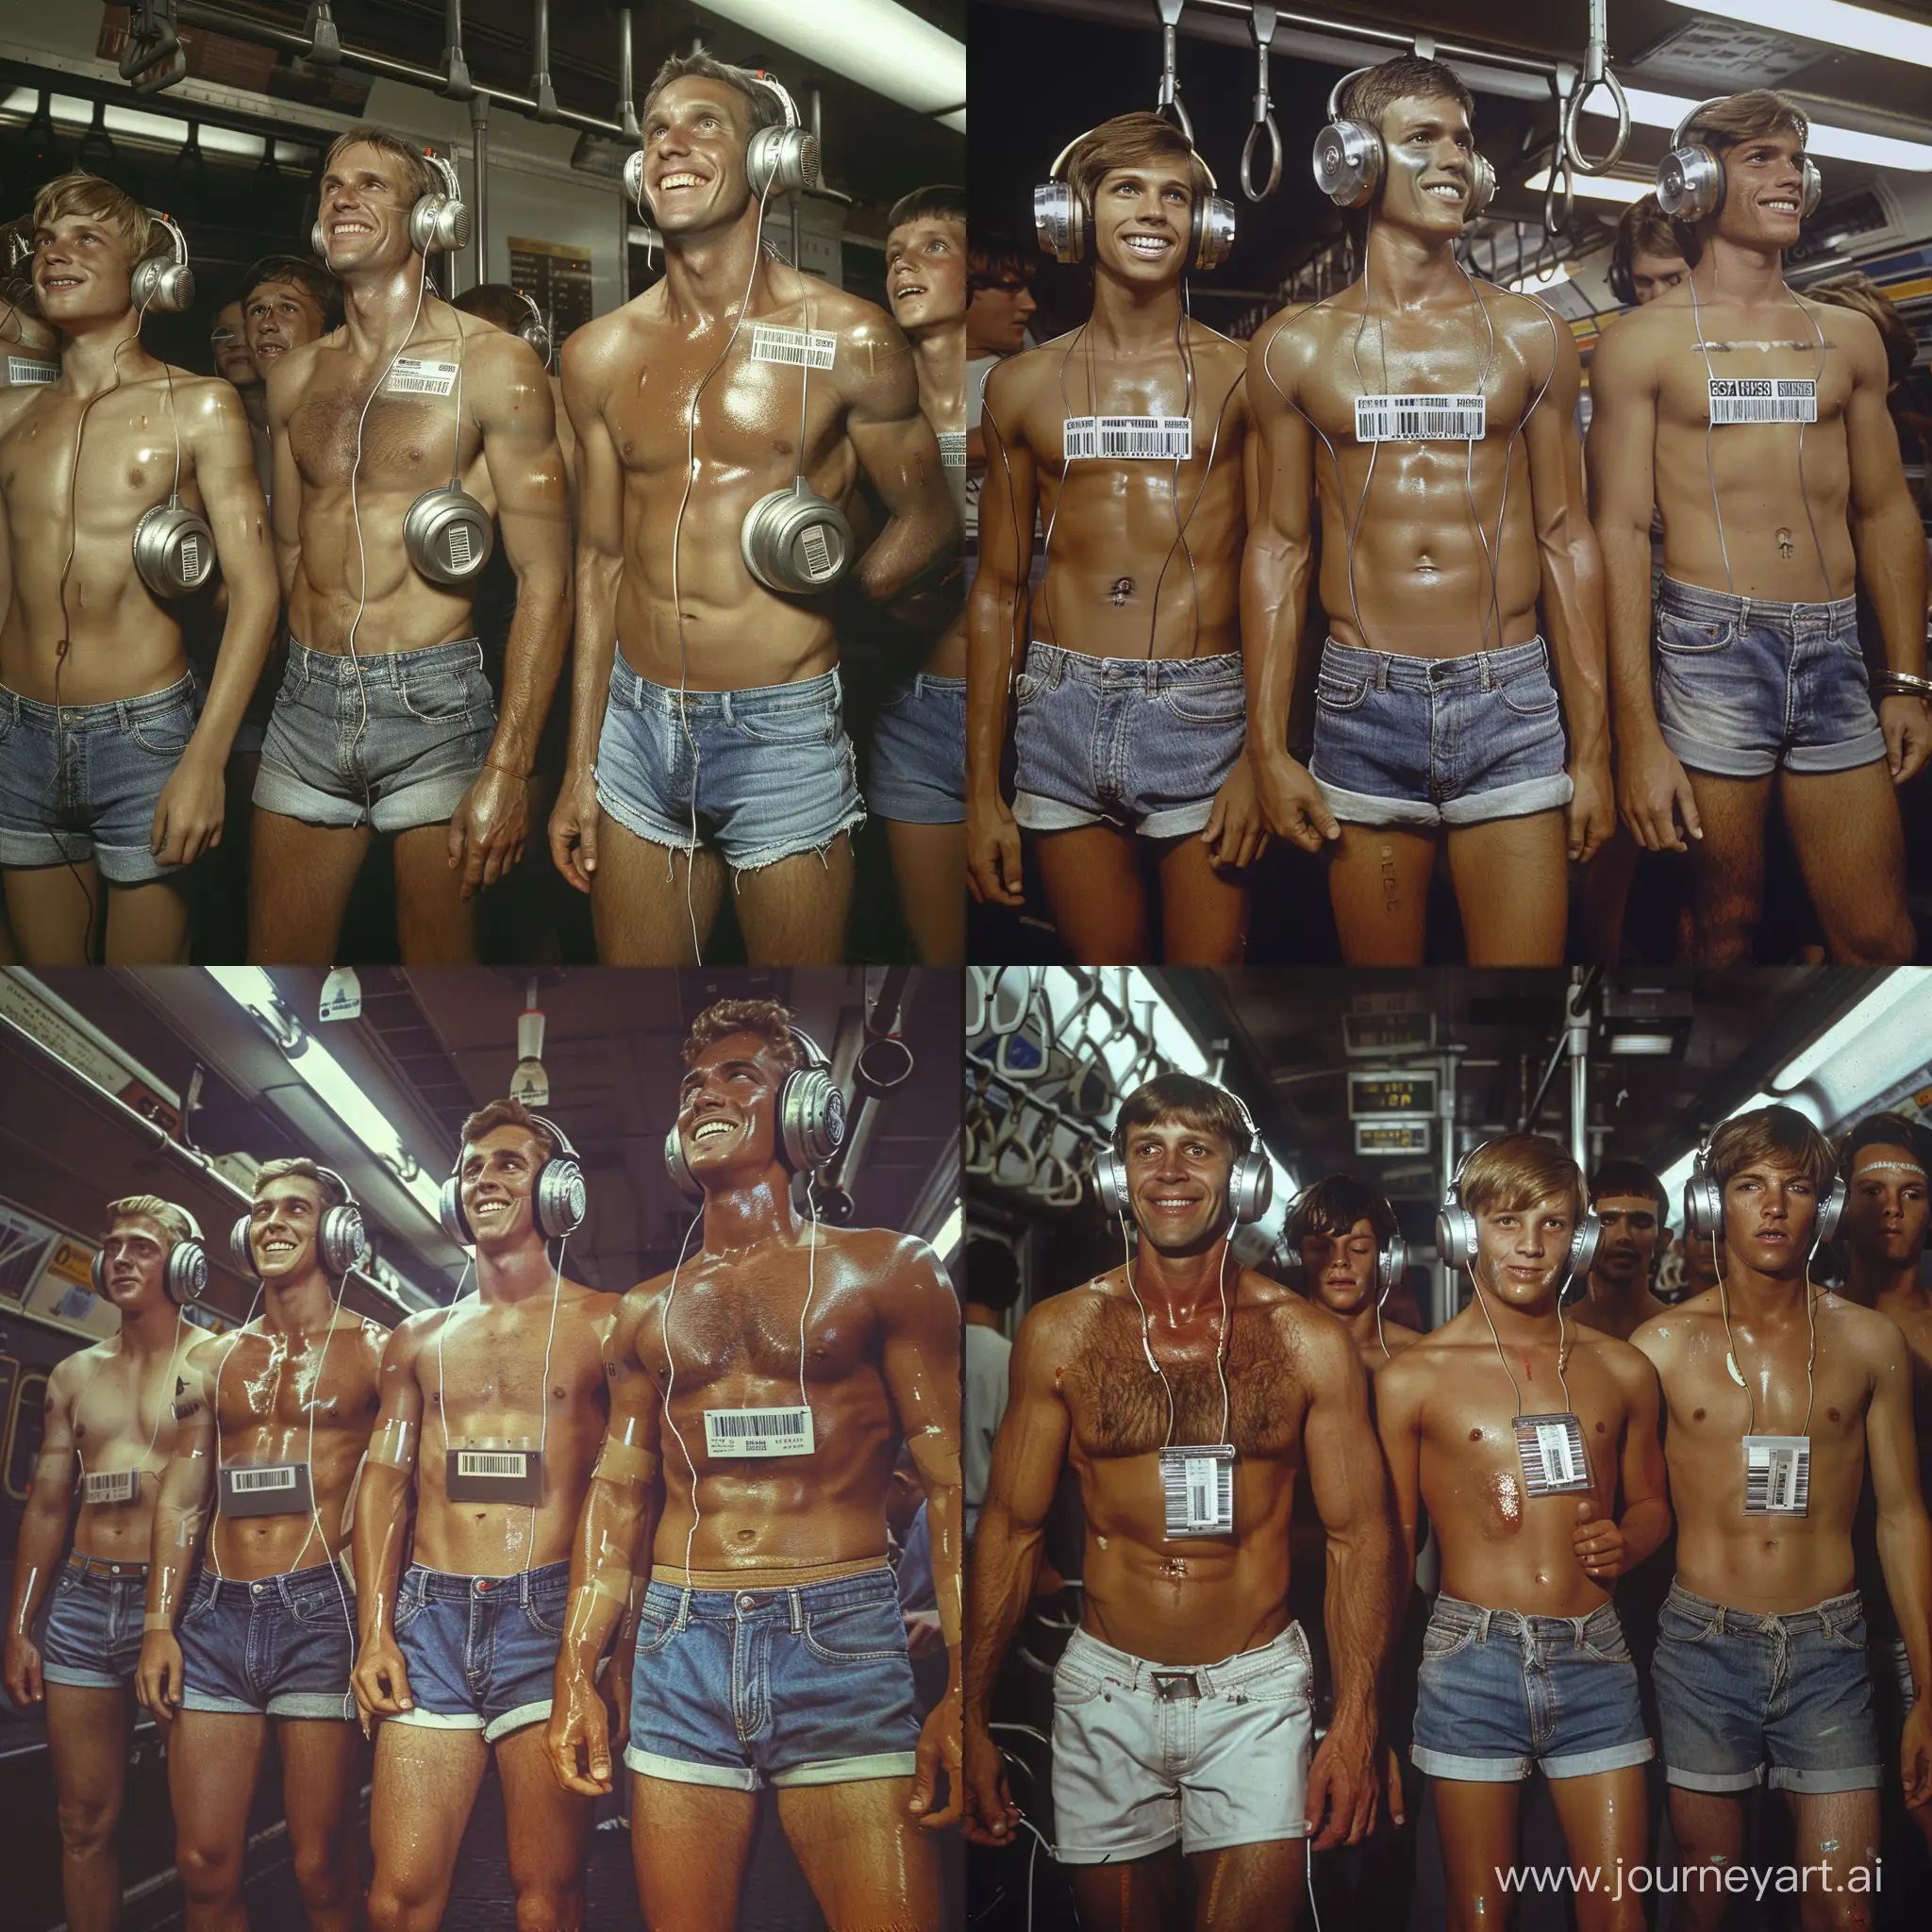 Muscular-Men-in-Denim-Shorts-with-Silver-Headphones-Subway-Indoctrination-Scene